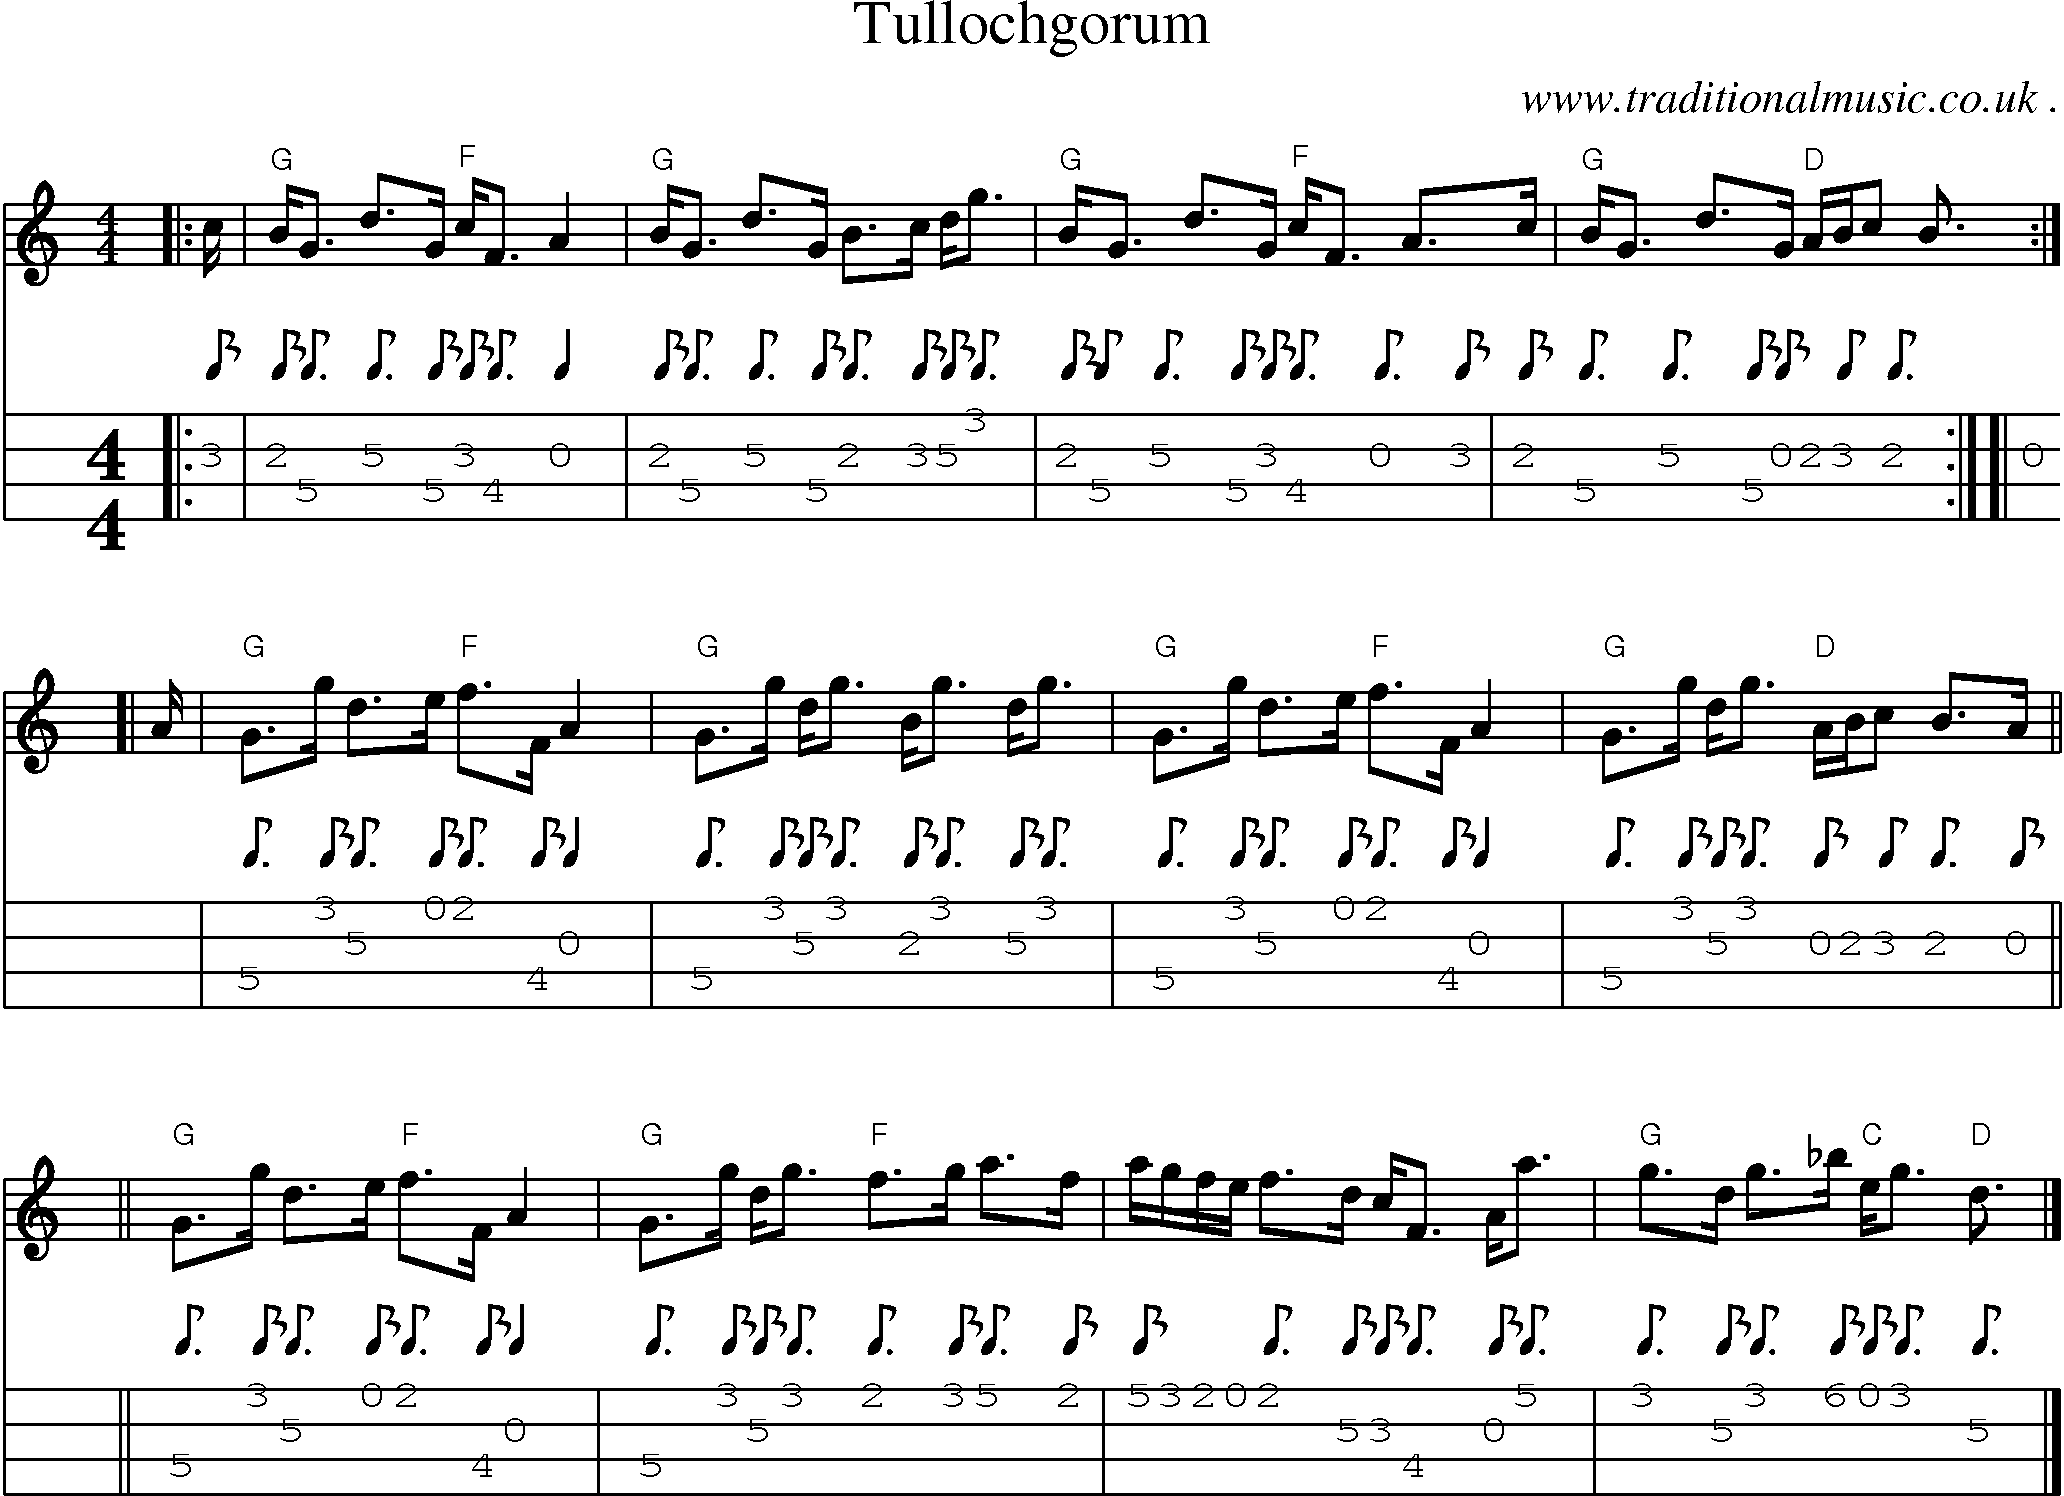 Sheet-music  score, Chords and Mandolin Tabs for Tullochgorum